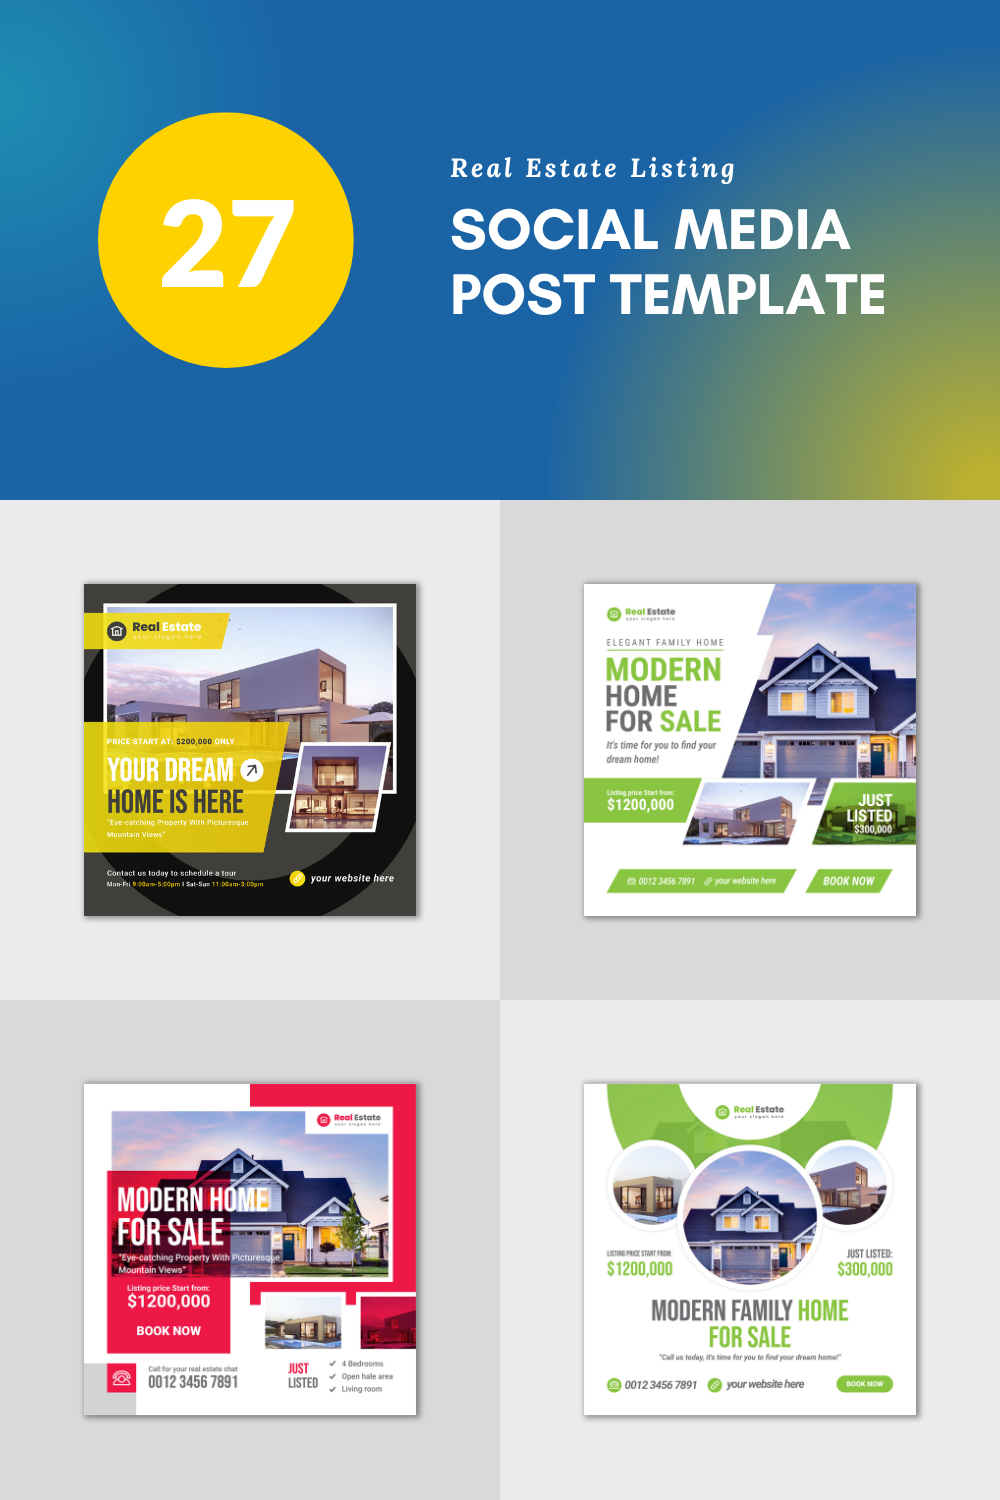 Social media posts Template for real estate agents pinterest preview image.